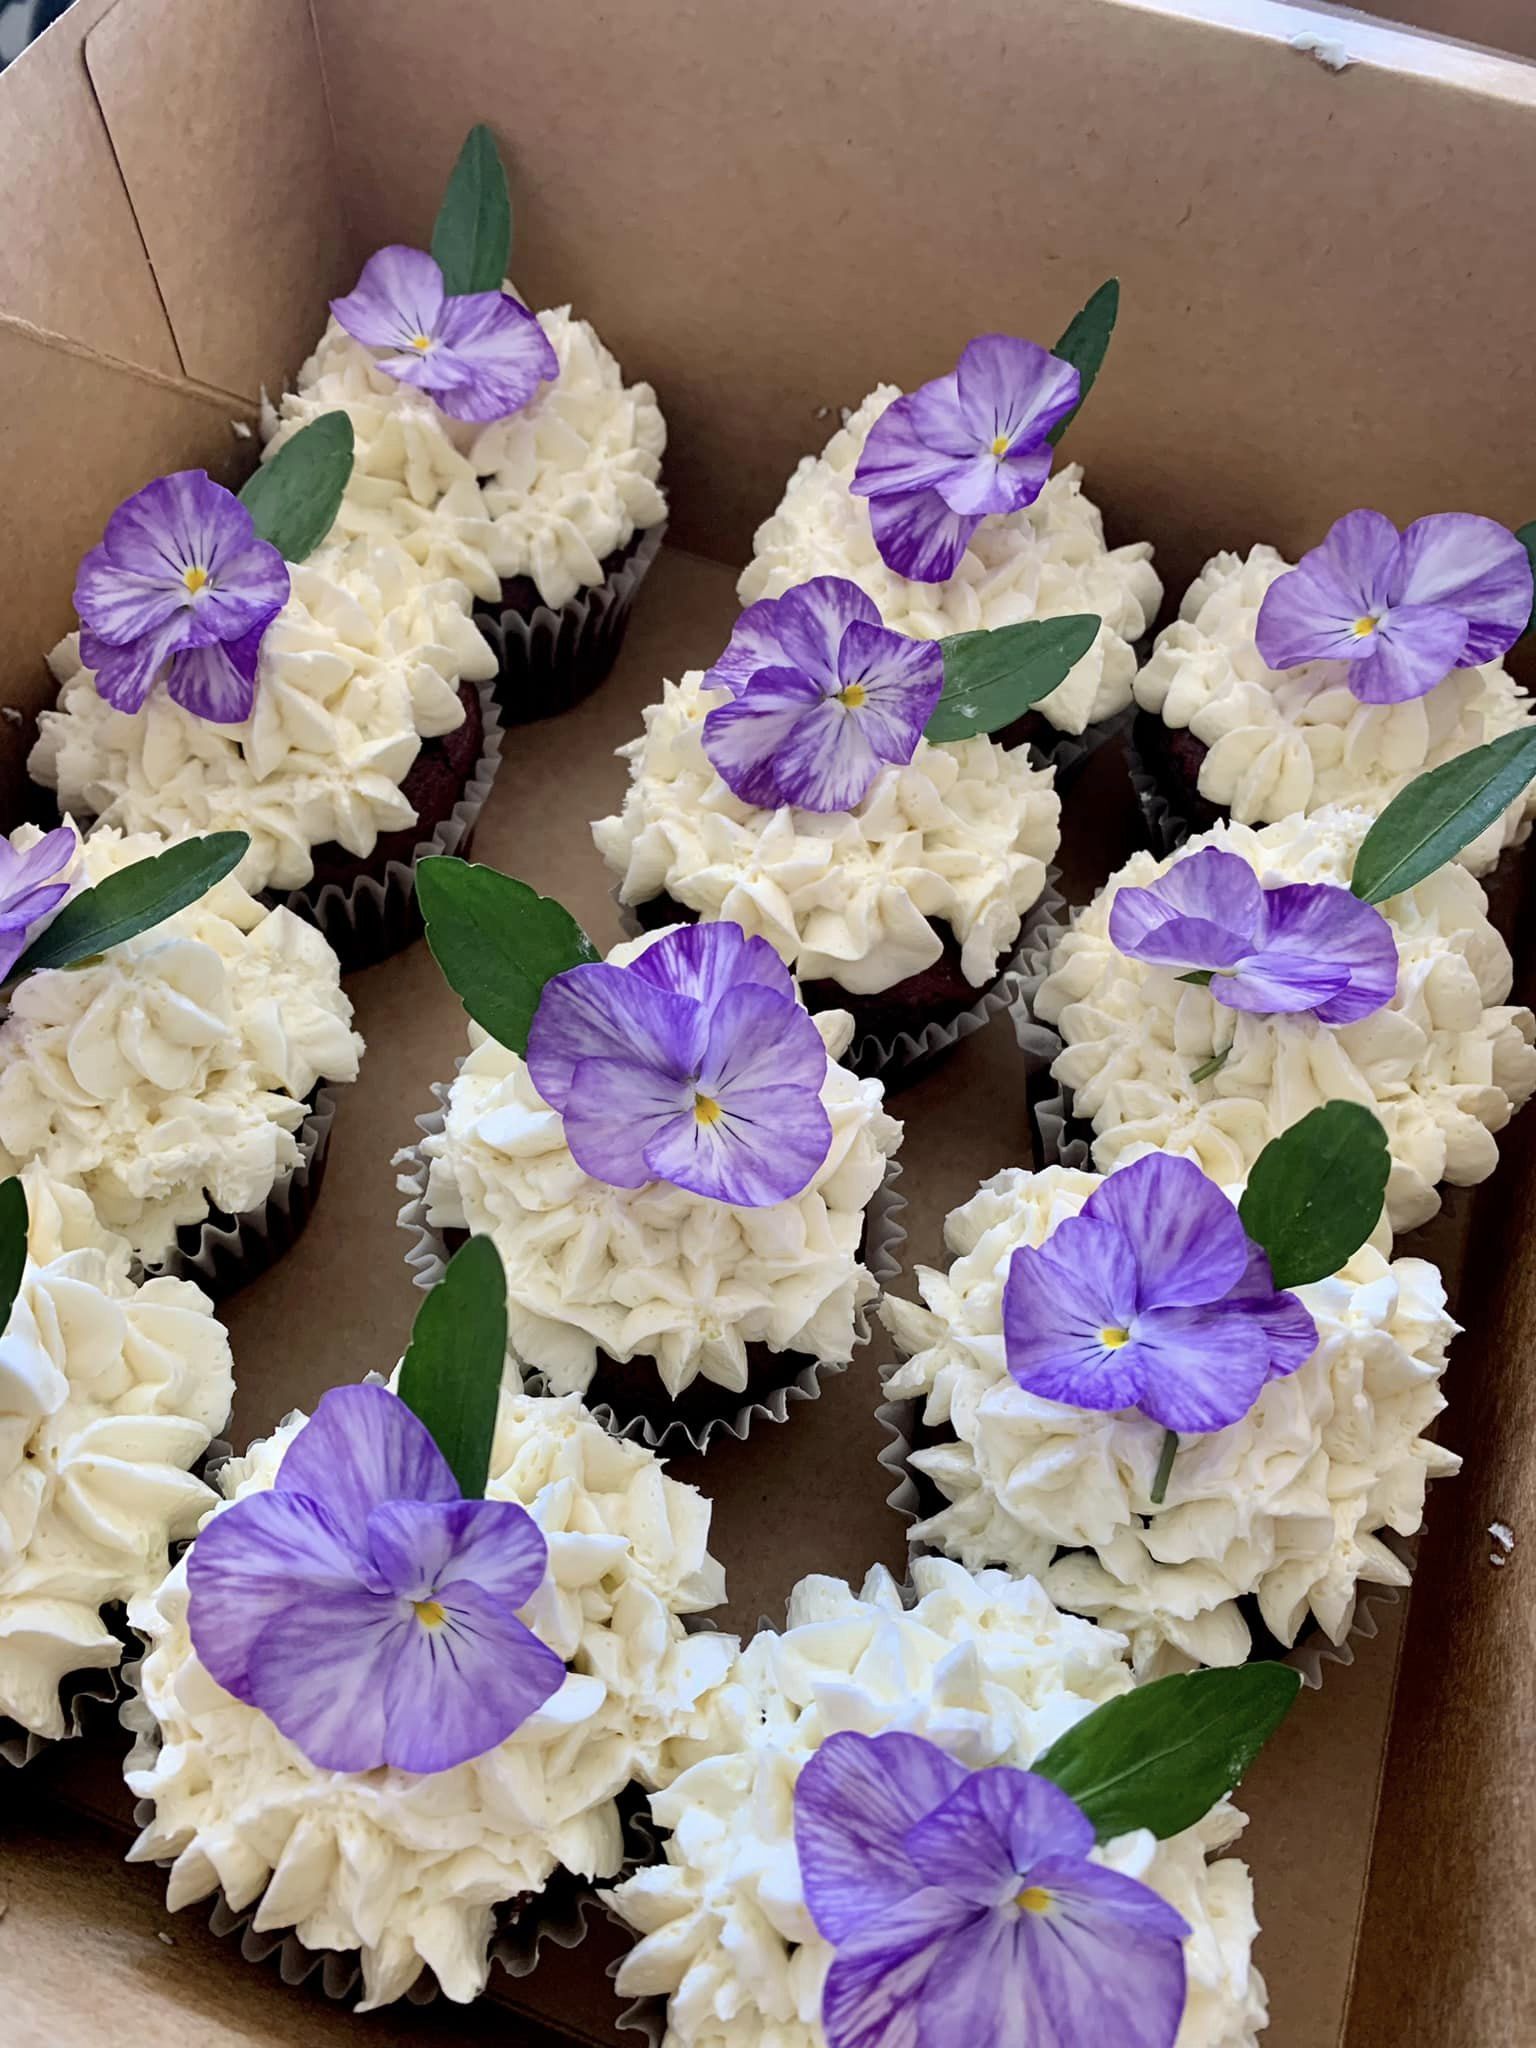 Floral party cupcakes by Divine South Kitchen and Catering in Gold Beach, Oregon